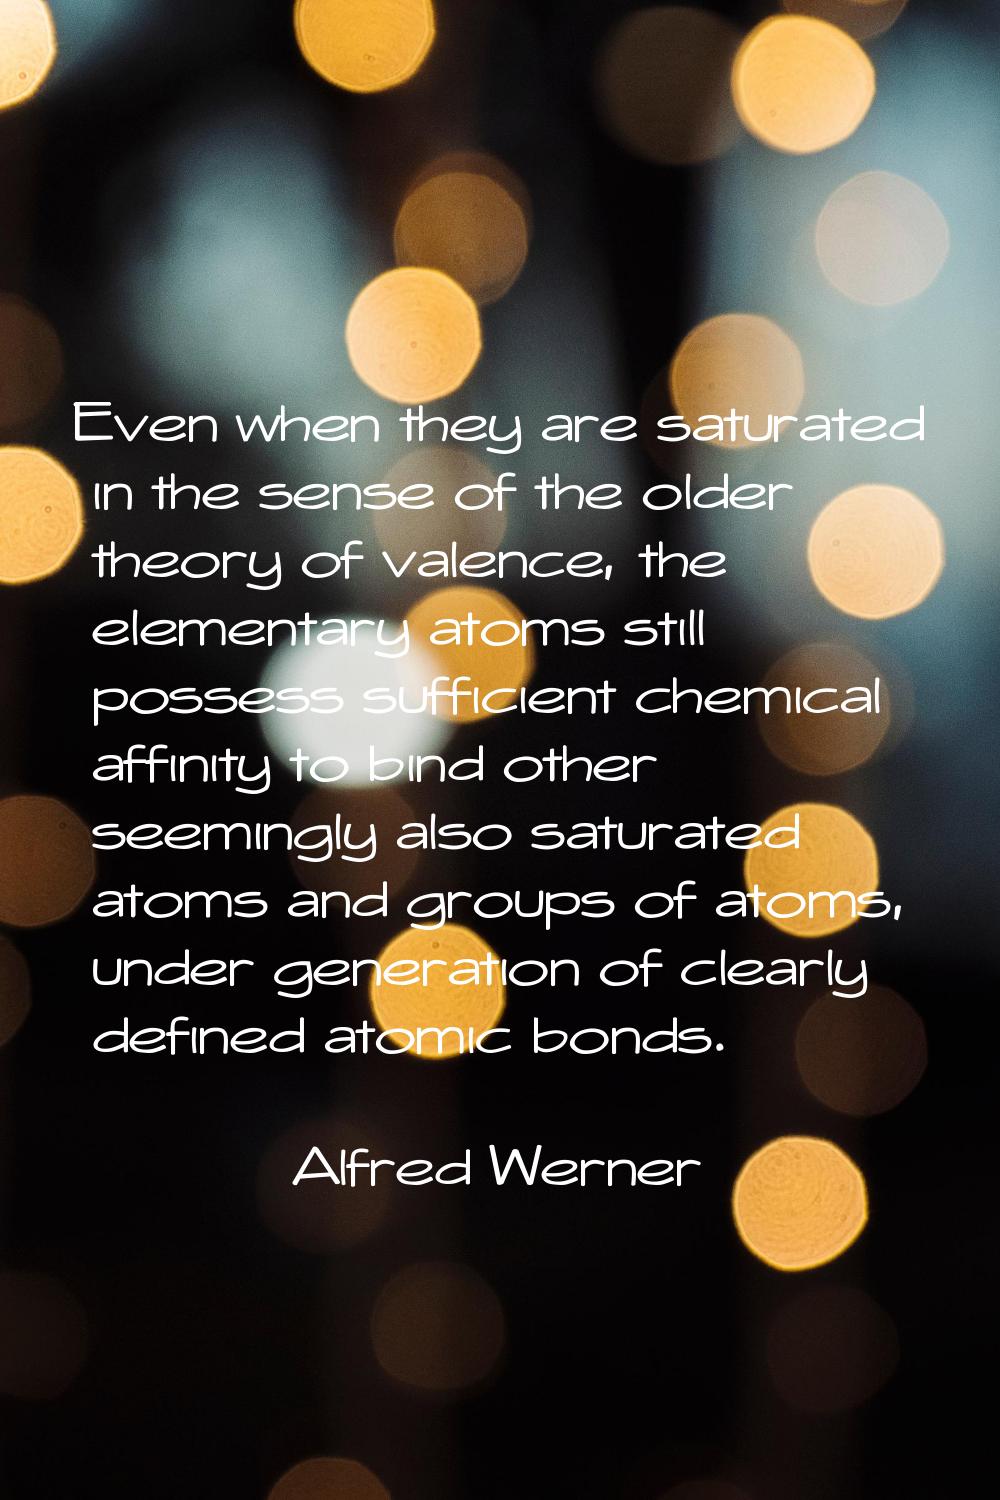 Even when they are saturated in the sense of the older theory of valence, the elementary atoms stil